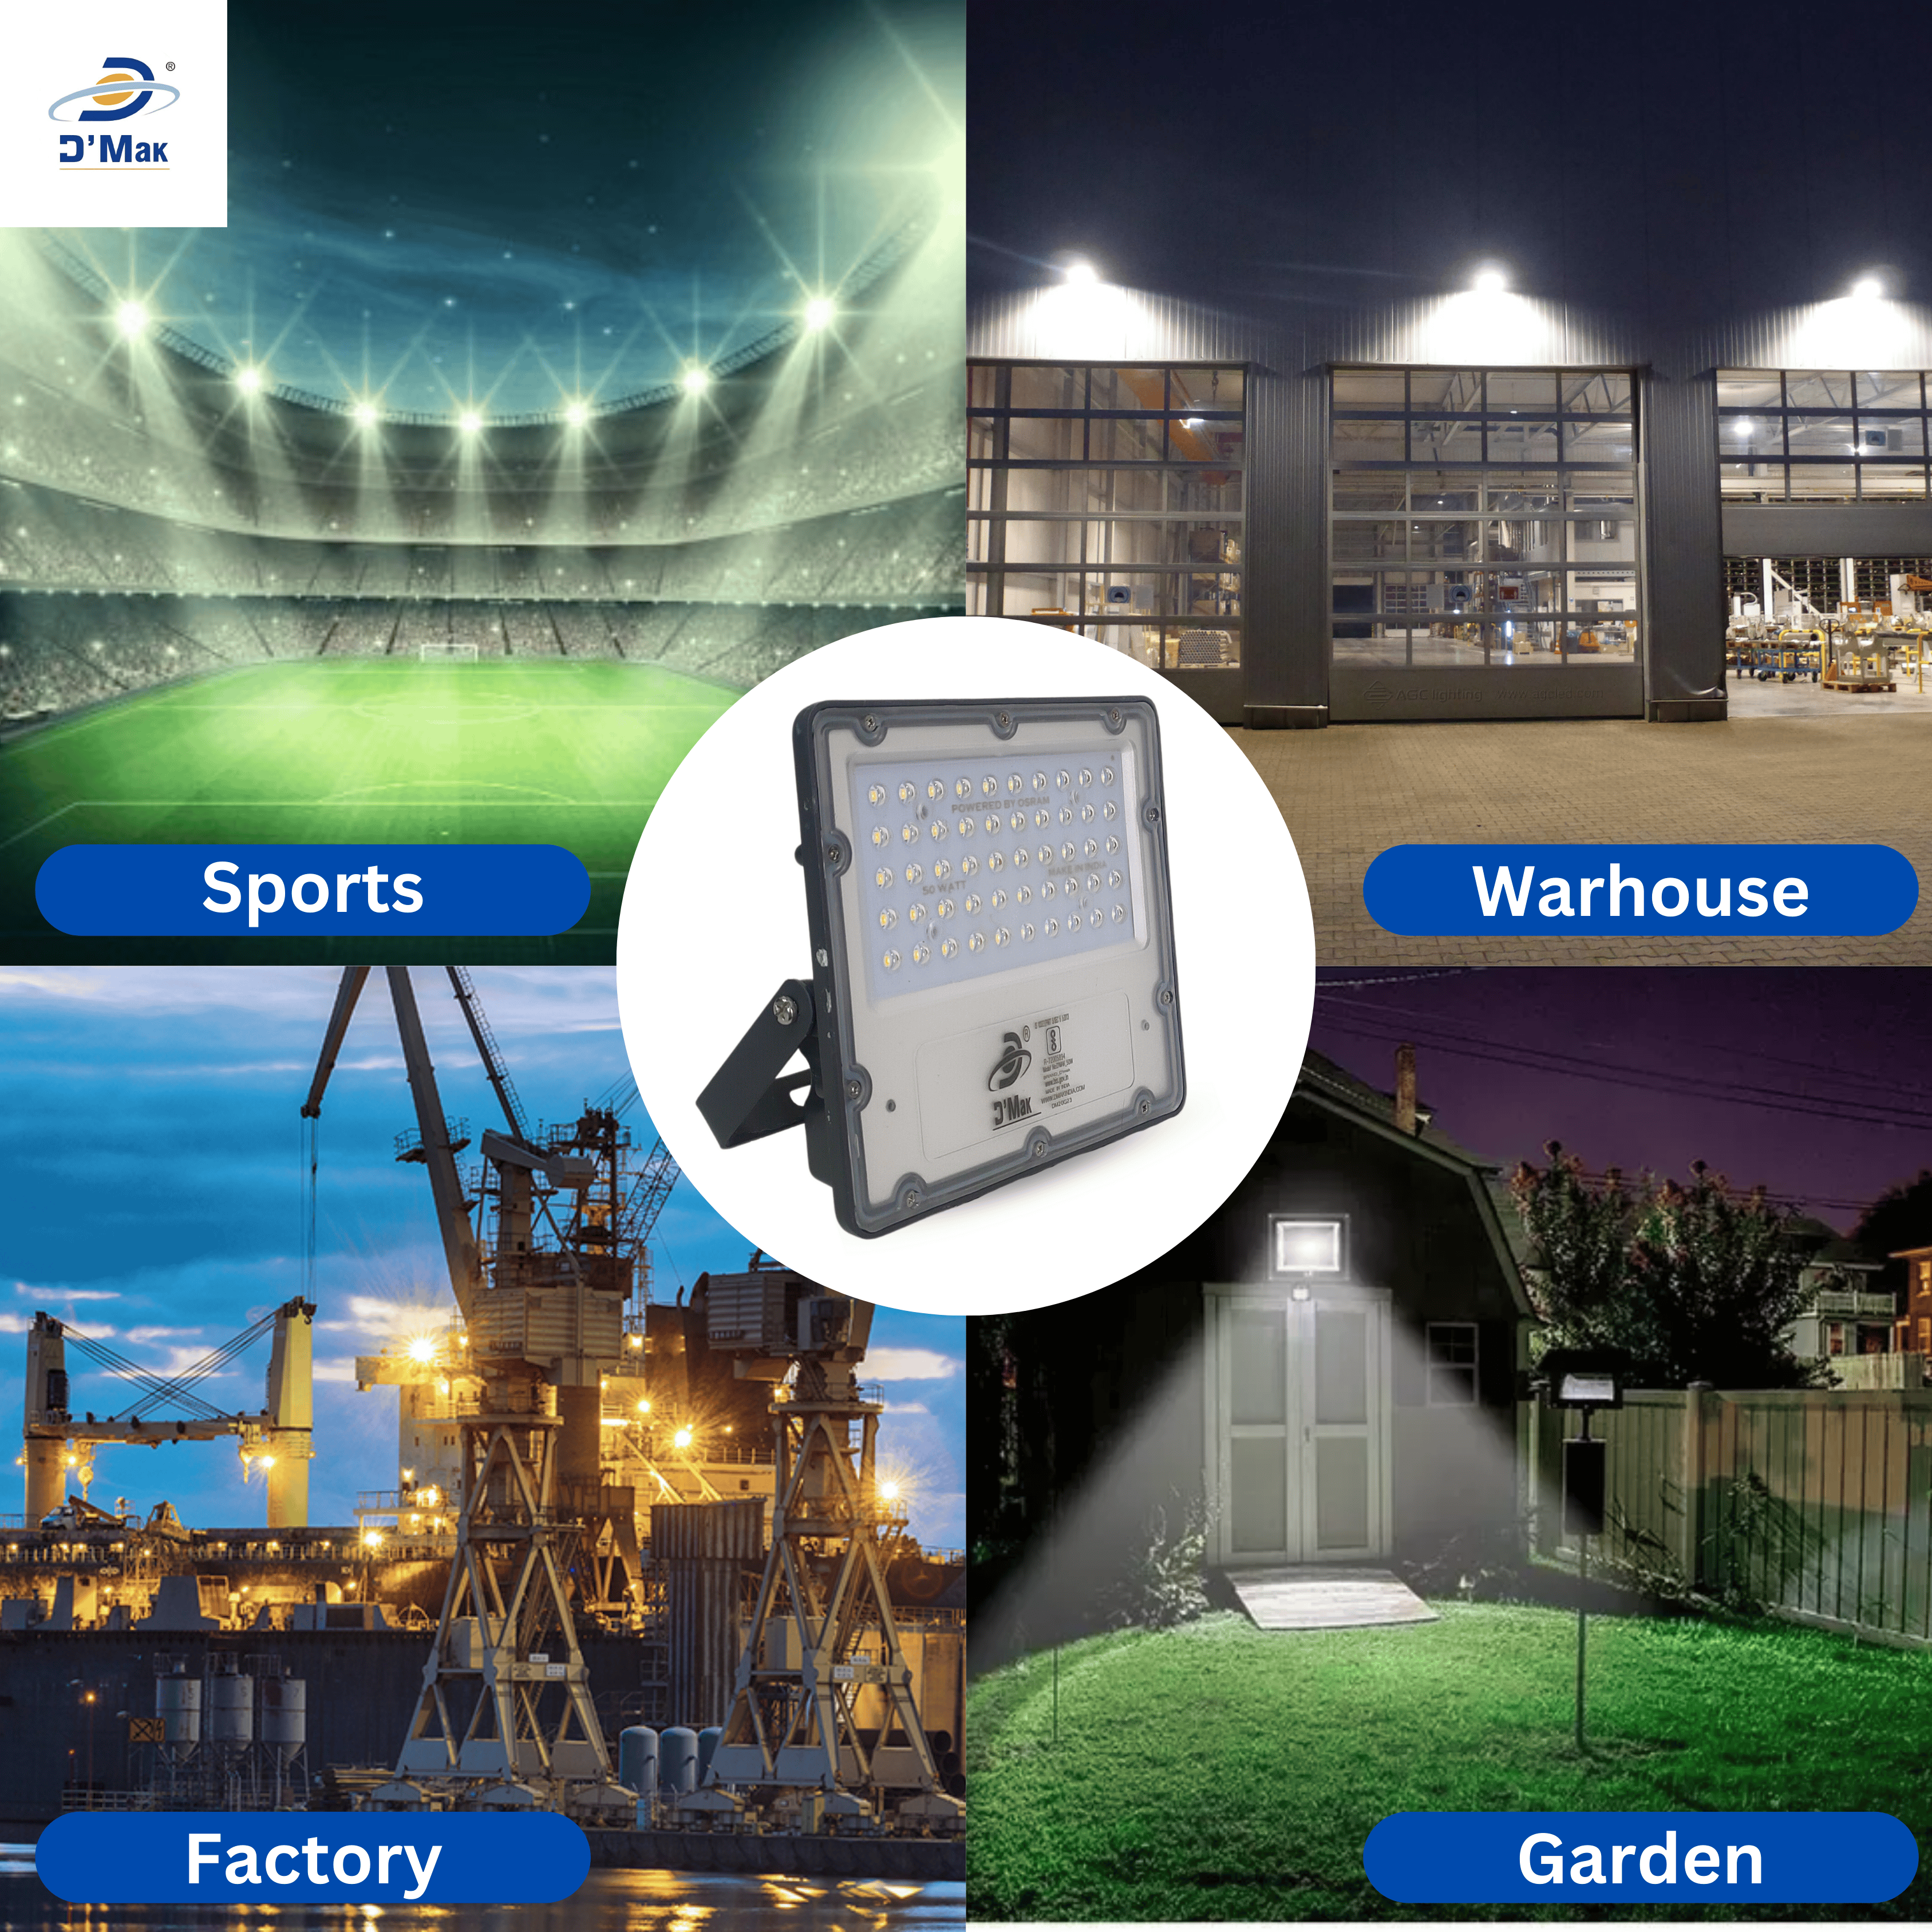 50 Watt LED Flood Light With Lens White Body Waterproof IP65 for Outdoor Purposes